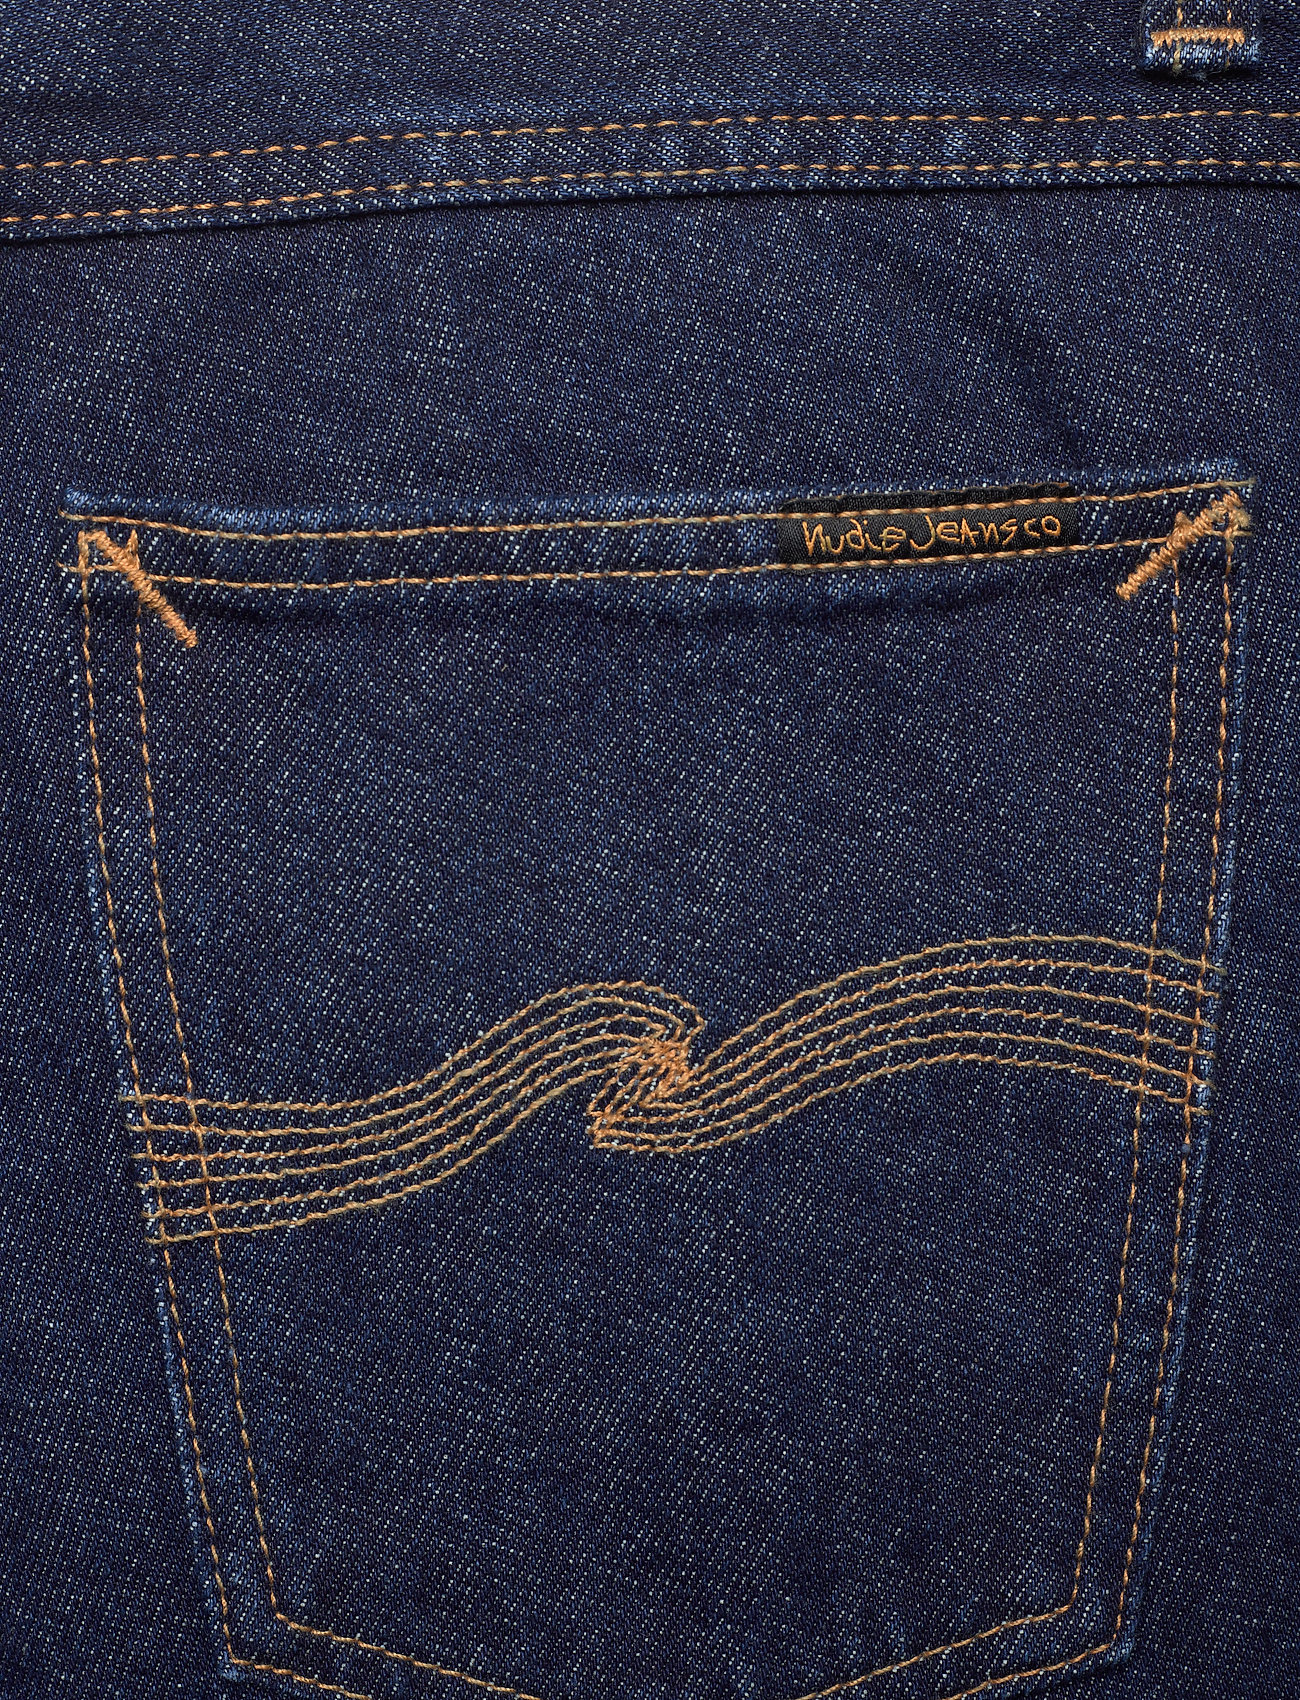 Nudie Jeans - Gritty Jackson - regular jeans - heavy rinse - 9